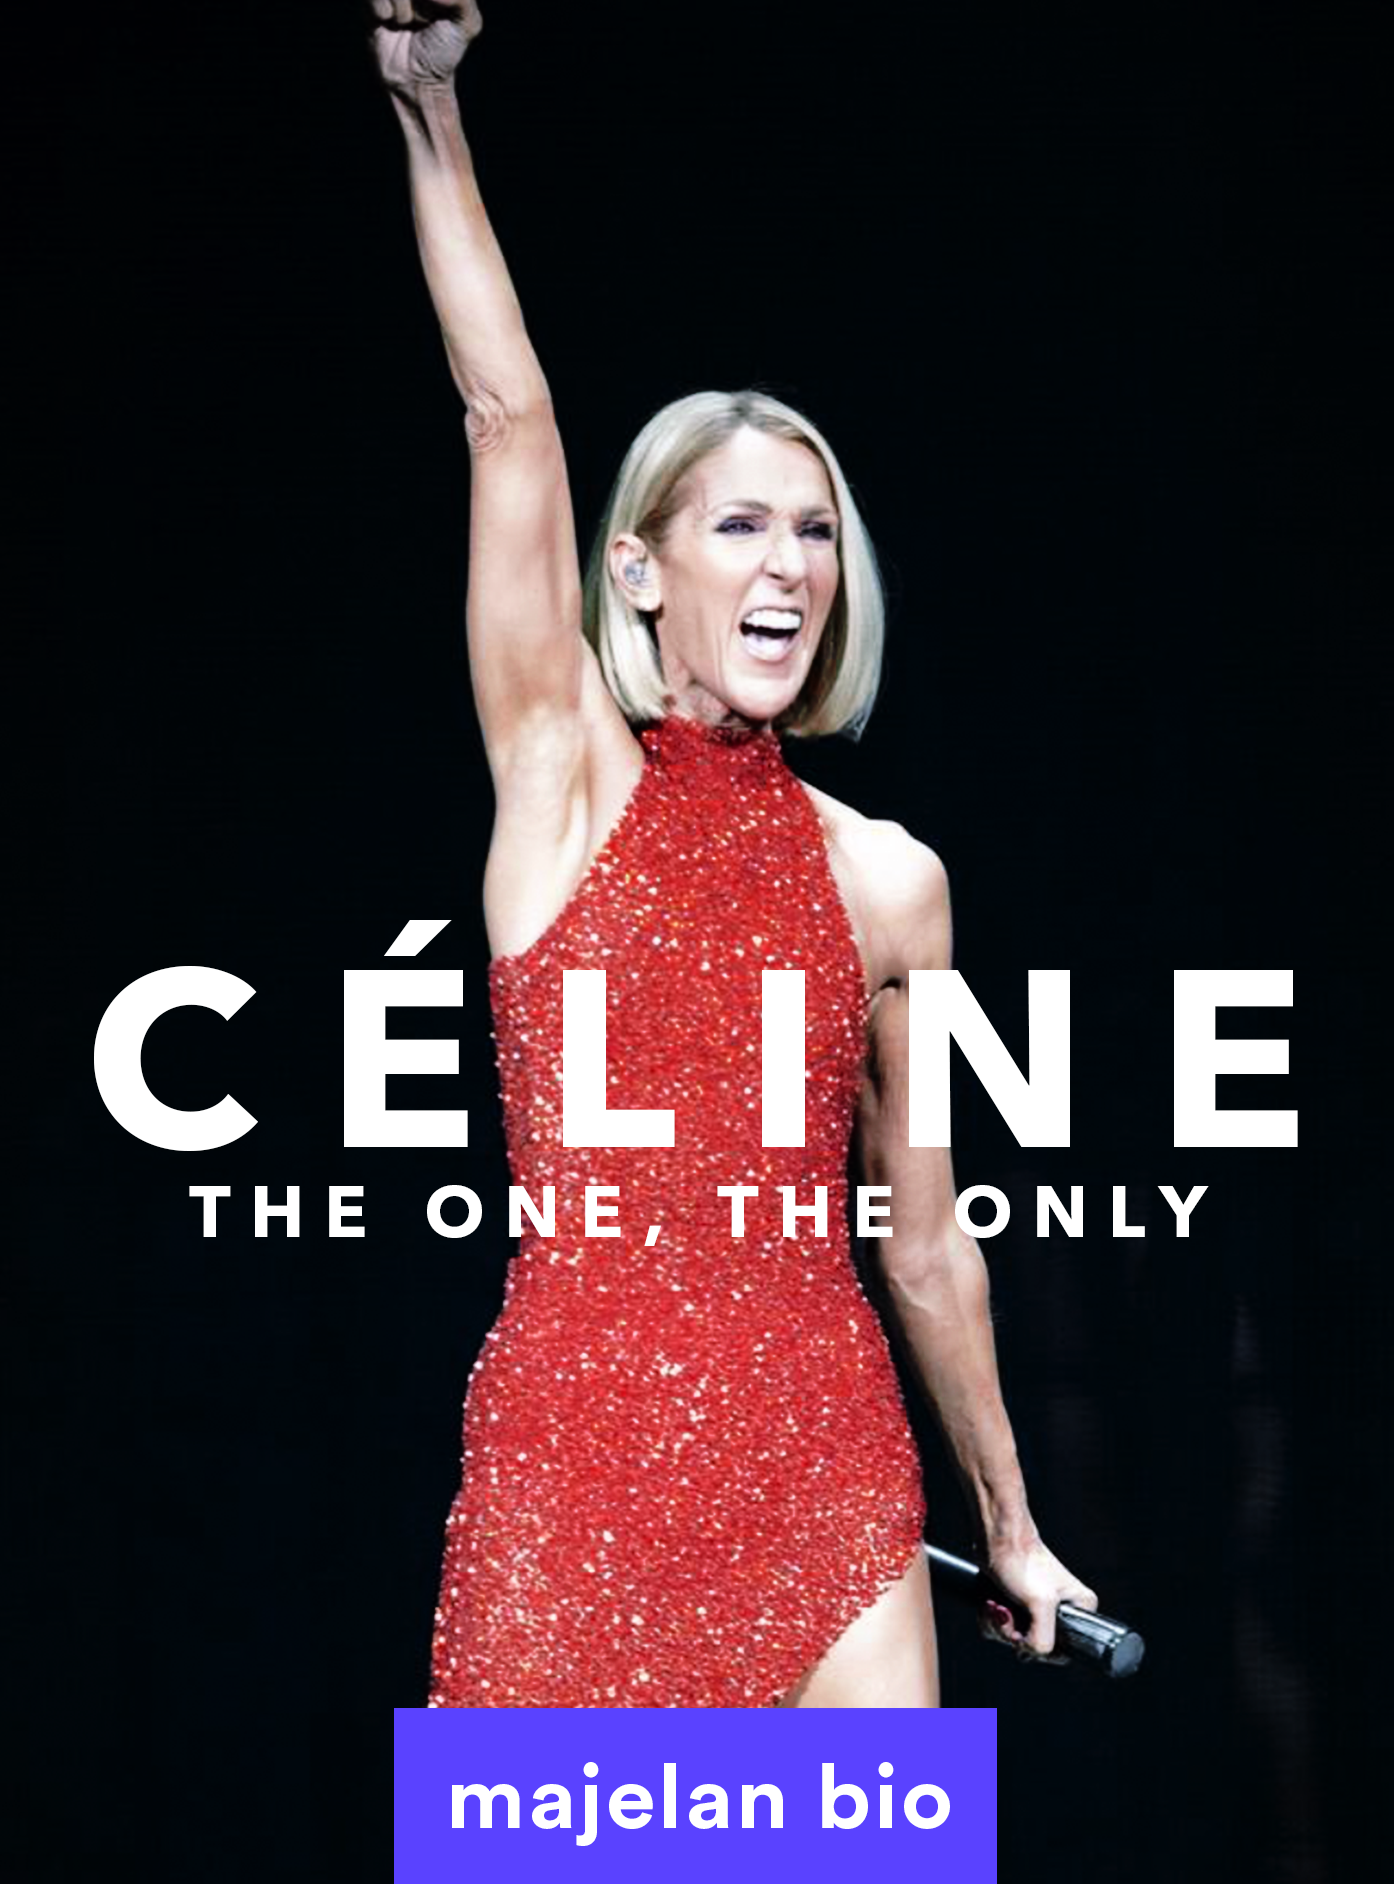 Céline Dion, the one, the only